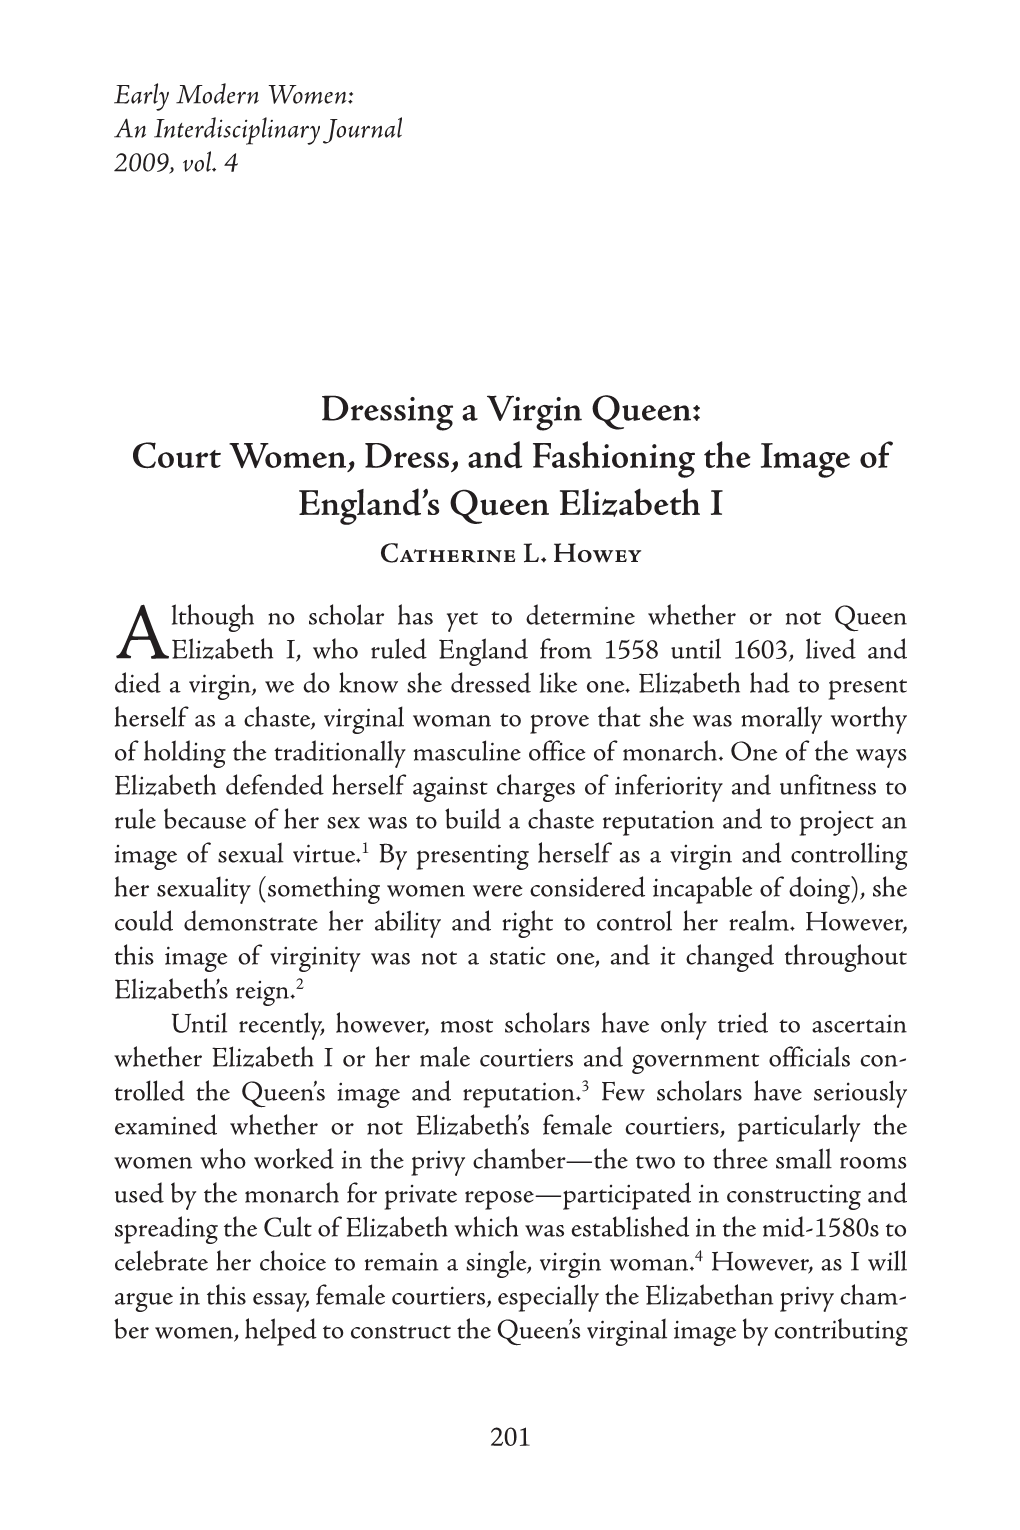 Court Women, Dress, and Fashioning the Image of England's Queen